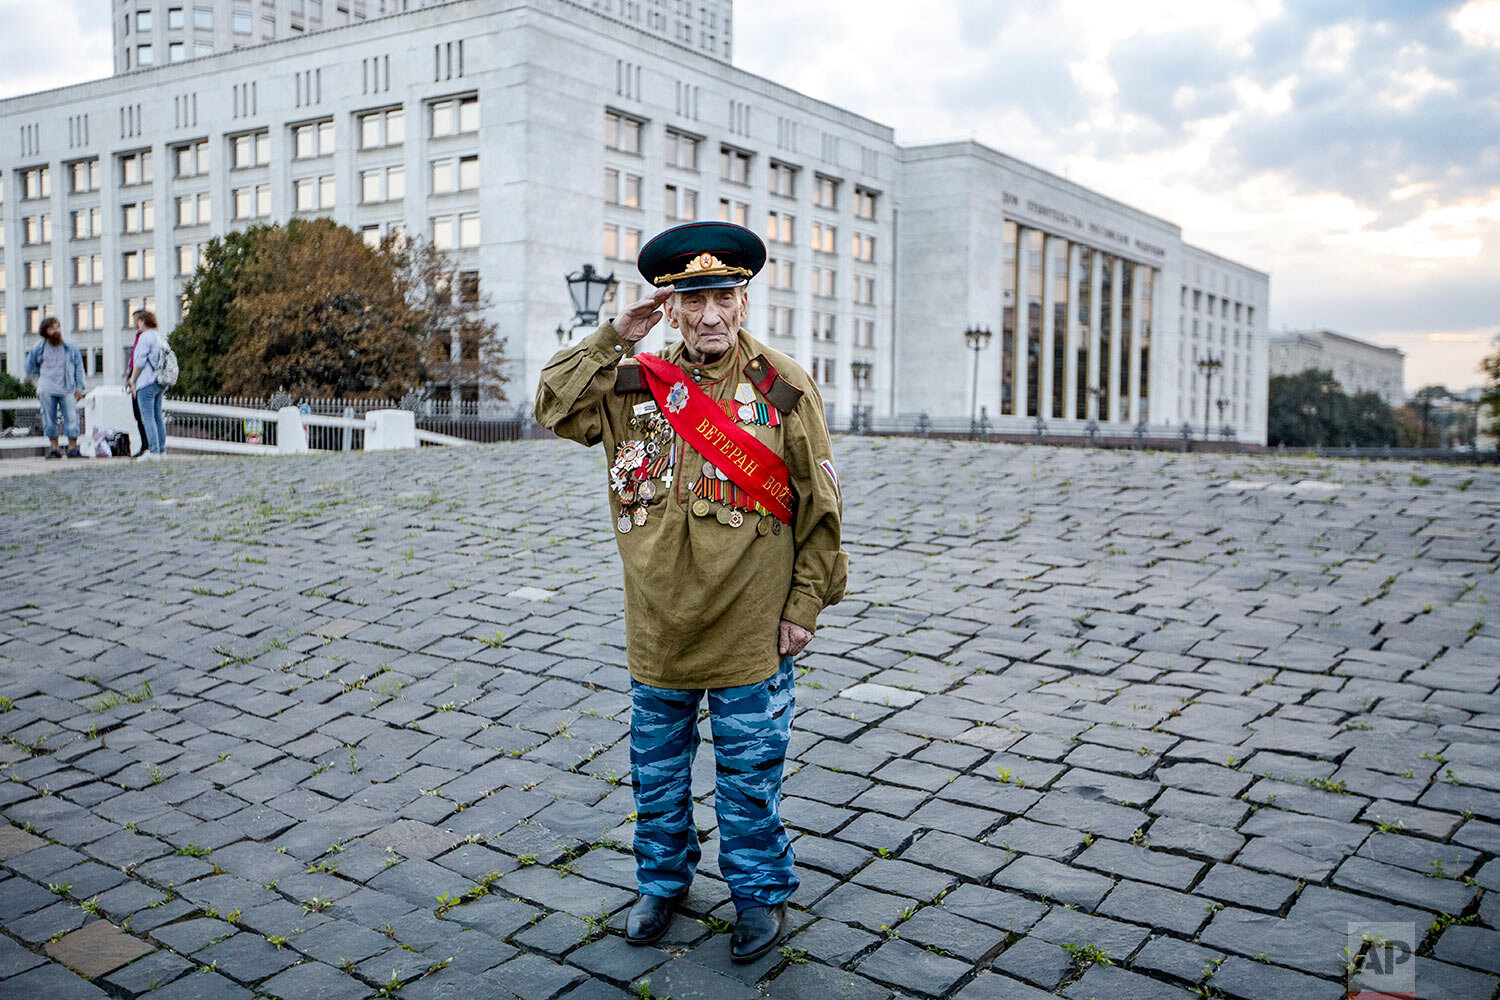  World War II veteran Lev Yatsevich, 92, salutes as he waits for other participants of an event marking the anniversary of the failed August 1991 hard-line coup outside the former Russian parliament building, which now houses the Russian Cabinet, in 